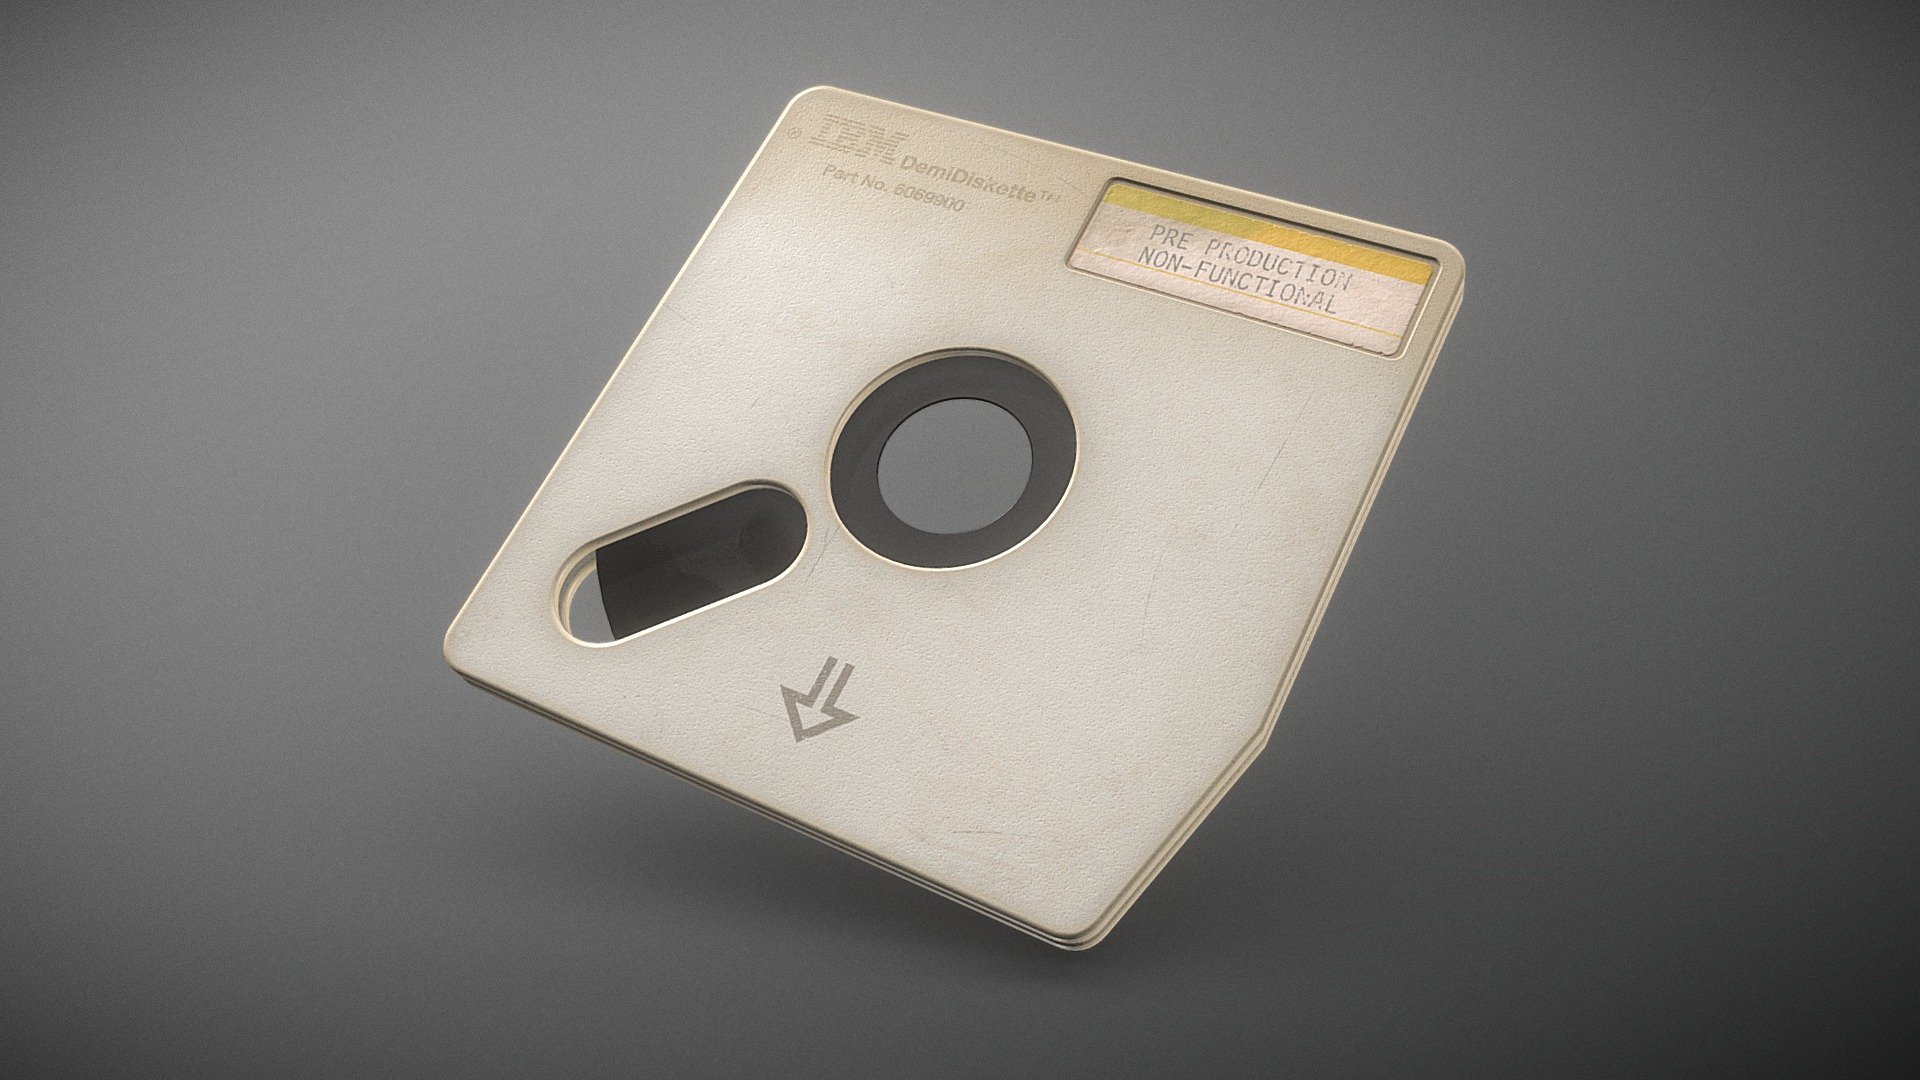 IBM's attempt at a 4-inch floppy disk—1983's DemiDiskette
In the early 1980s, the need became clear for a floppy disk drive and associated disk that were smaller and more rugged than the 5.25-inch standard which pervaded the personal computer world. A number of companies proposed alternatives, including Sony with a 3.5-inch disk, a consortium of Hitachi, Maxell and Matsushita (Panasonic) with a 3-inch disk, Tabor with a 3.25-inch disk, and IBM with a 4-inch floppy disk drive, the Model 341 and an associated diskette, the DemiDiskette. This program was driven by aggressive cost goals, but missed the pulse of the industry. The product was announced and withdrawn in 1983 with only a few units shipped, with IBM writing off several hundred million dollars of development and manufacturing facility. When the dust settled, the industry settled on a 3.5-inch standard and the other alternatives, including IBM's, were relegated to the dustbin of computer history 3d model